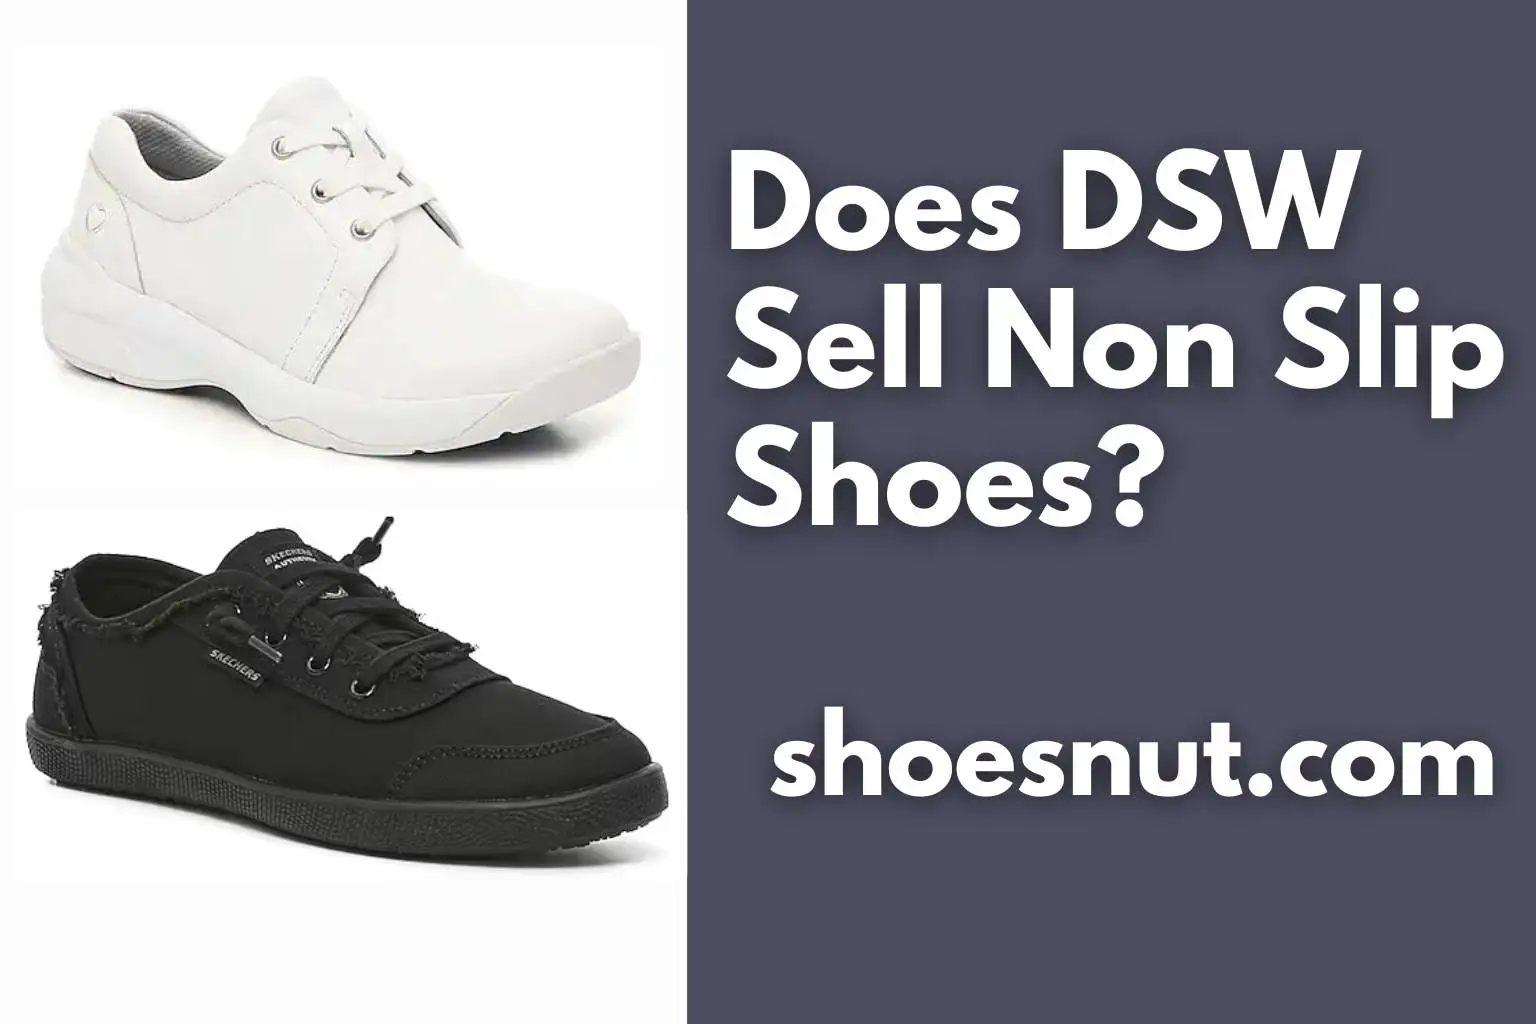 Does DSW Sell Non Slip Shoes?